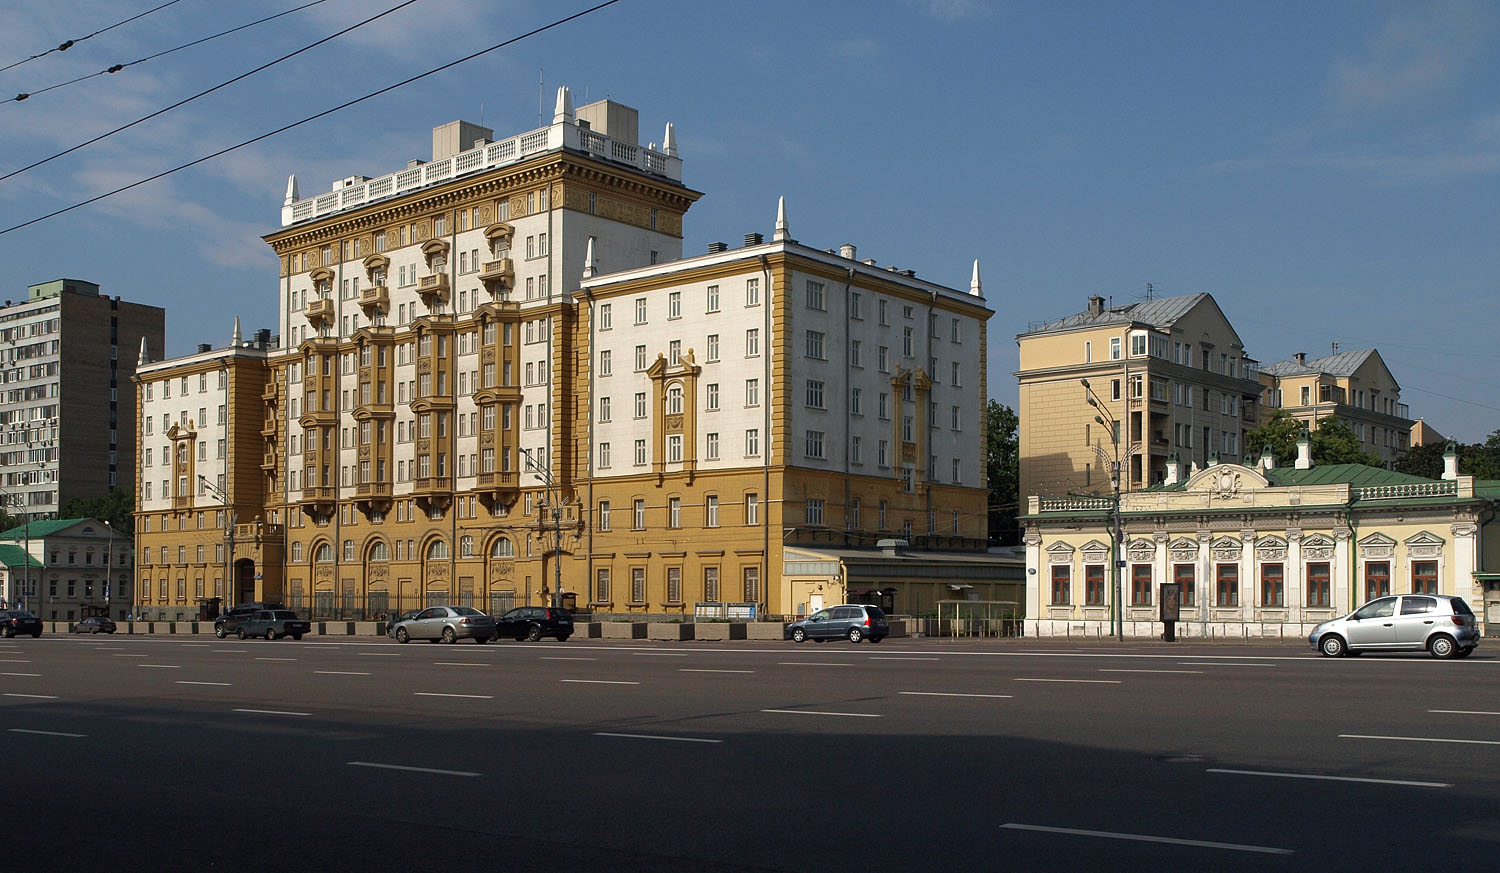 http://upload.wikimedia.org/wikipedia/commons/8/8f/Moscow,_US_Embassy_and_Chalyapin_house.jpg